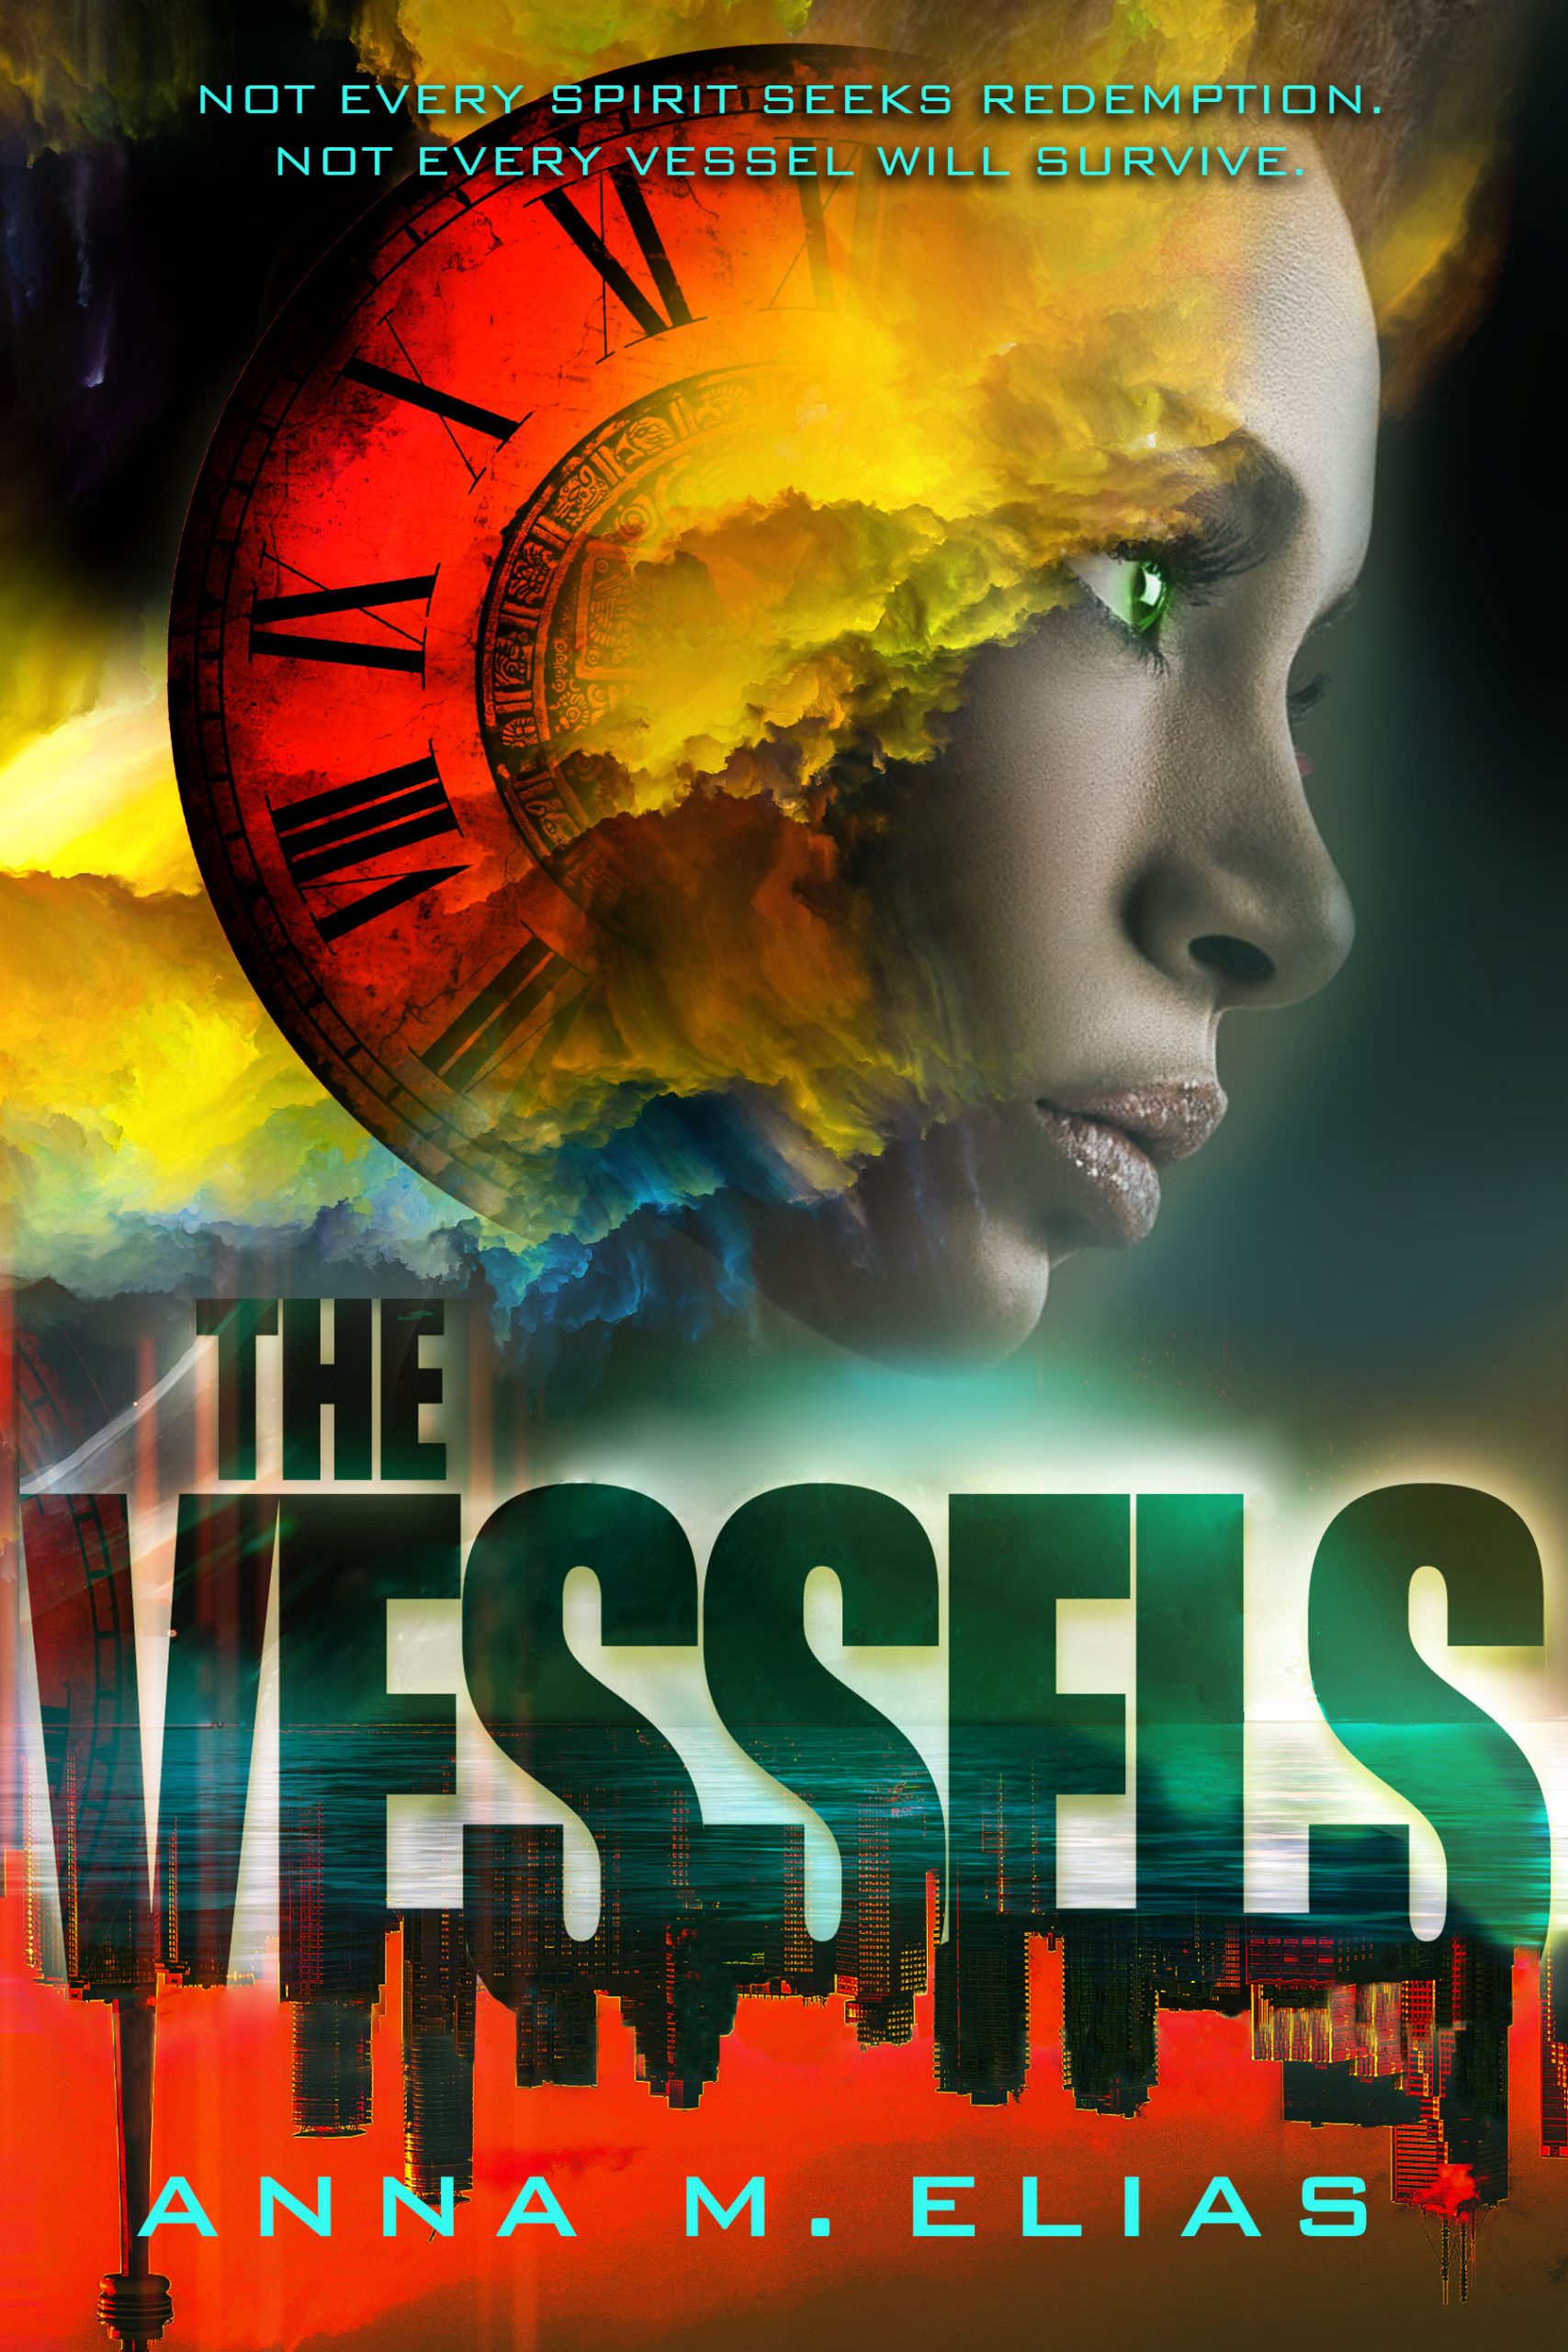 The Vessels by Anna M Elias